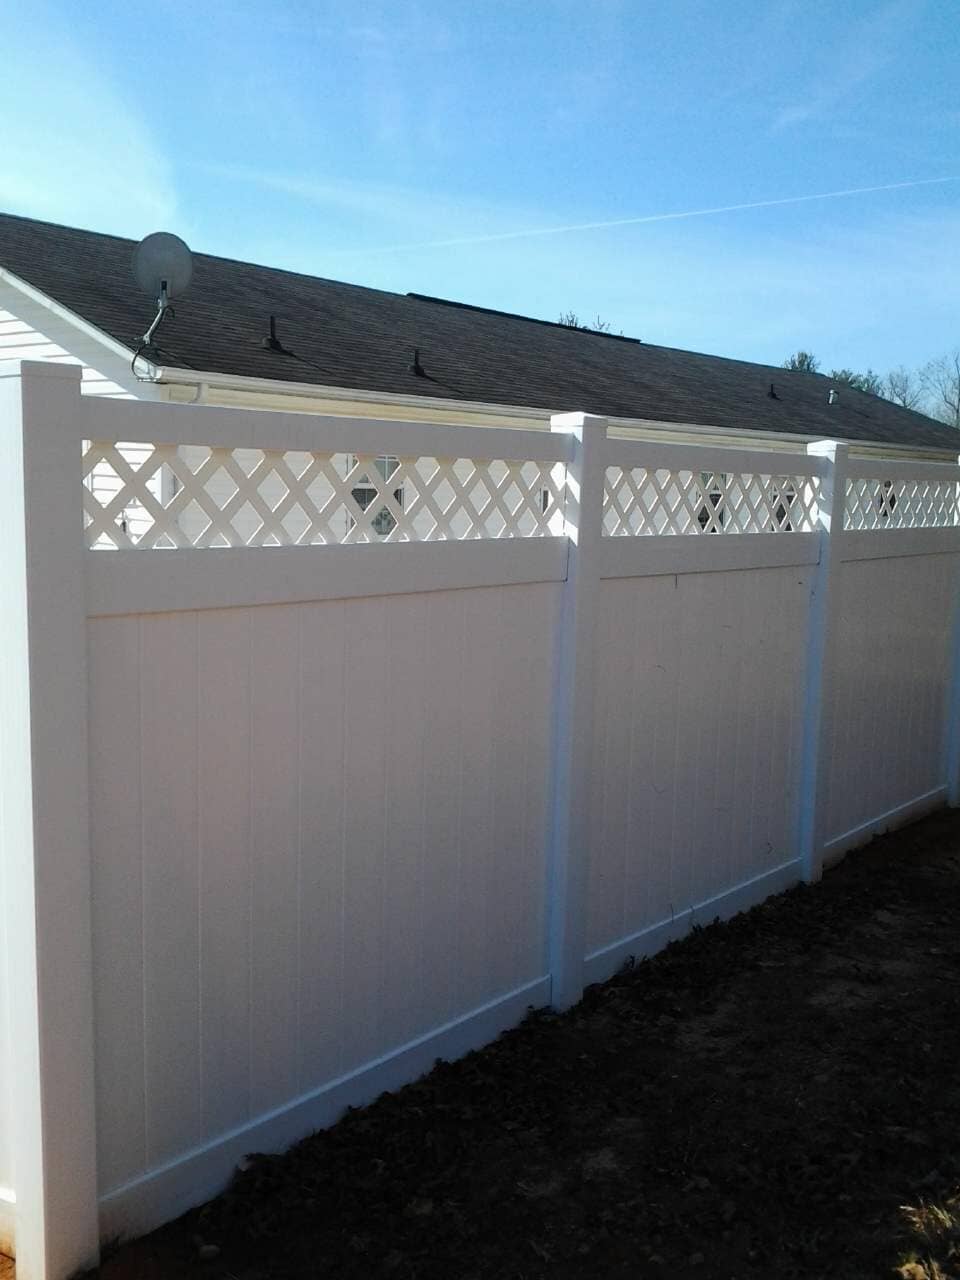 Fister Fence of Hickory, LLC Photo